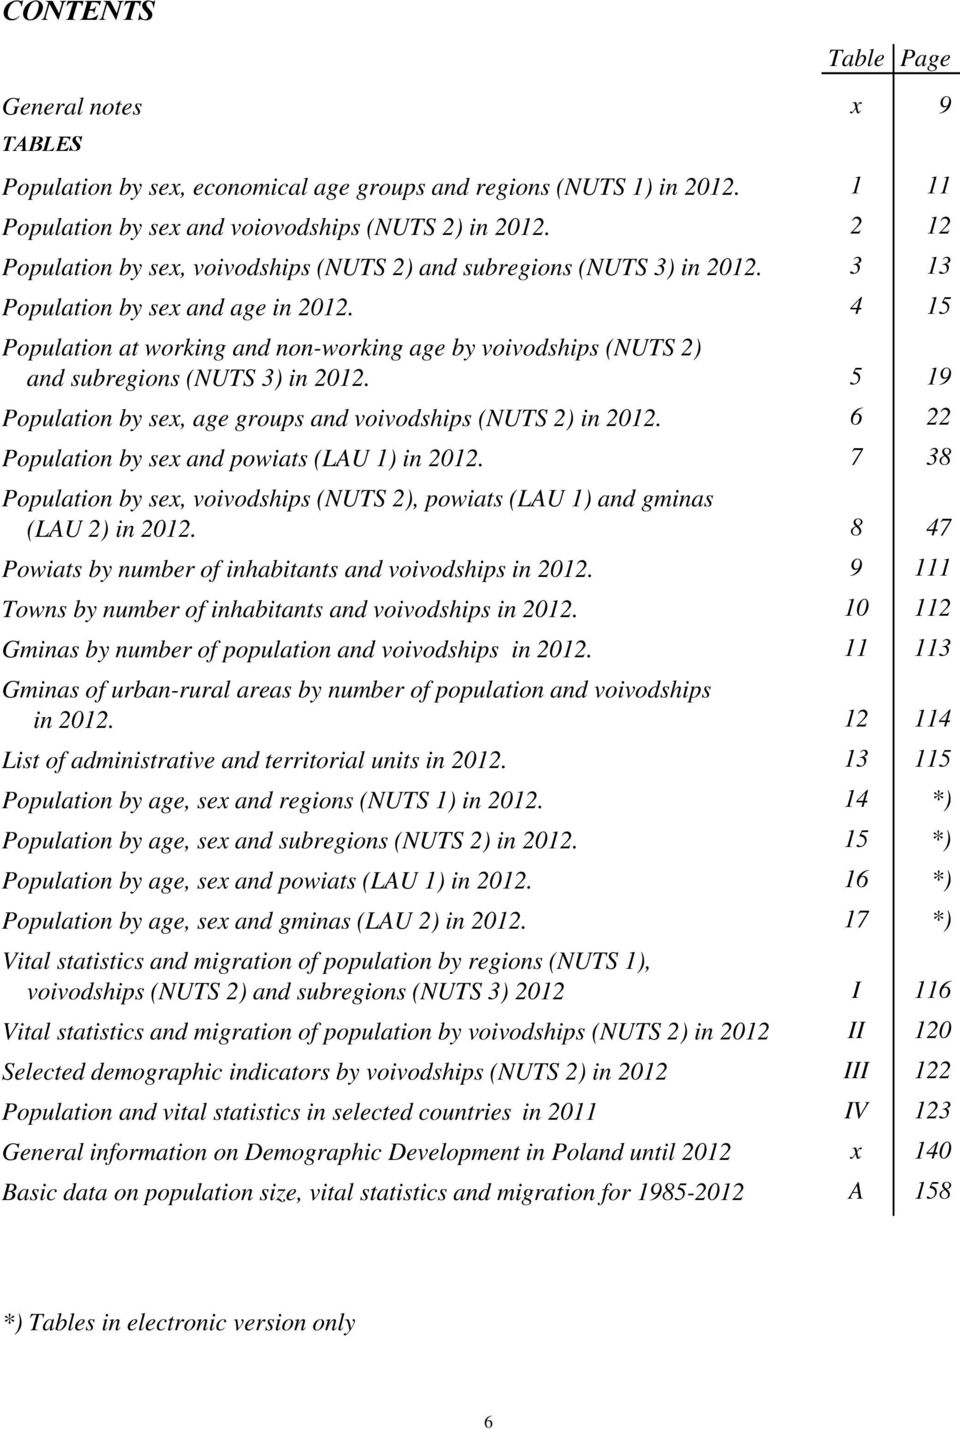 4 15 Population at working and non-working age by voivodships (NUTS 2) and subregions (NUTS 3) in 2012. 5 19 Population by sex, age groups and voivodships (NUTS 2) in 2012.